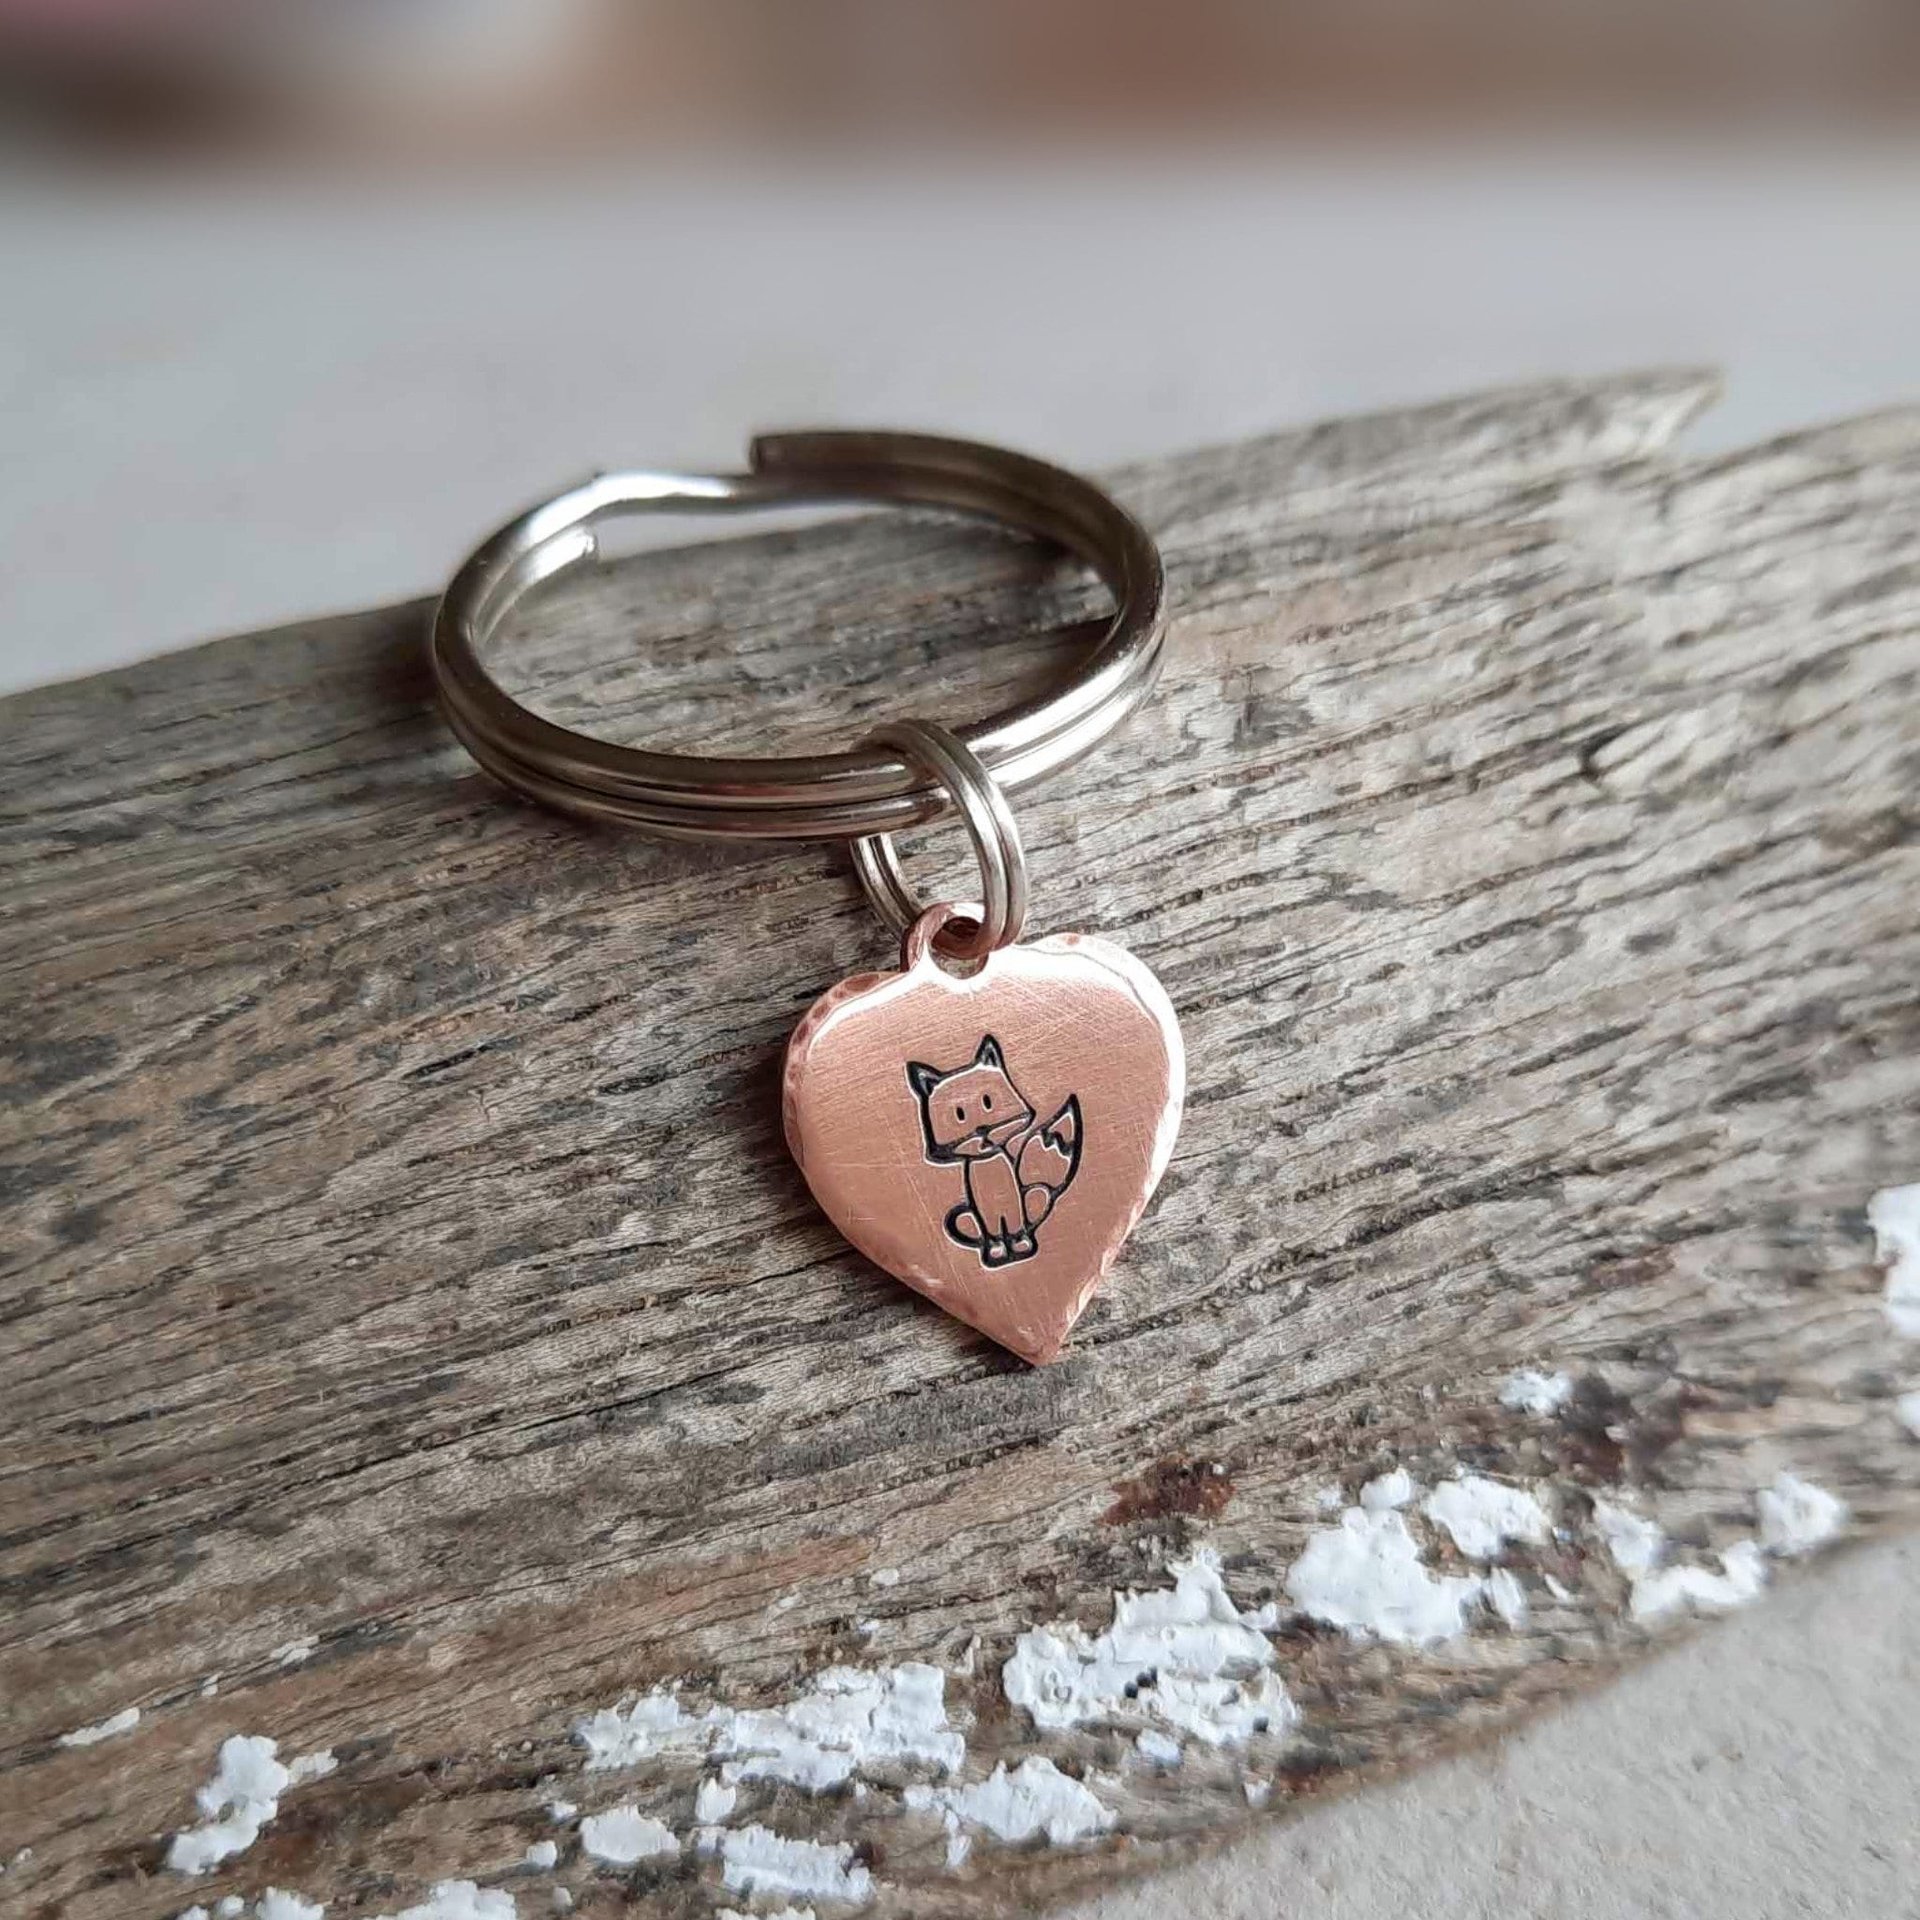 Cute hand stamped copper fox keychain - gift for fox lover - handcrafted by The Tiny Tree Frog Jewellery